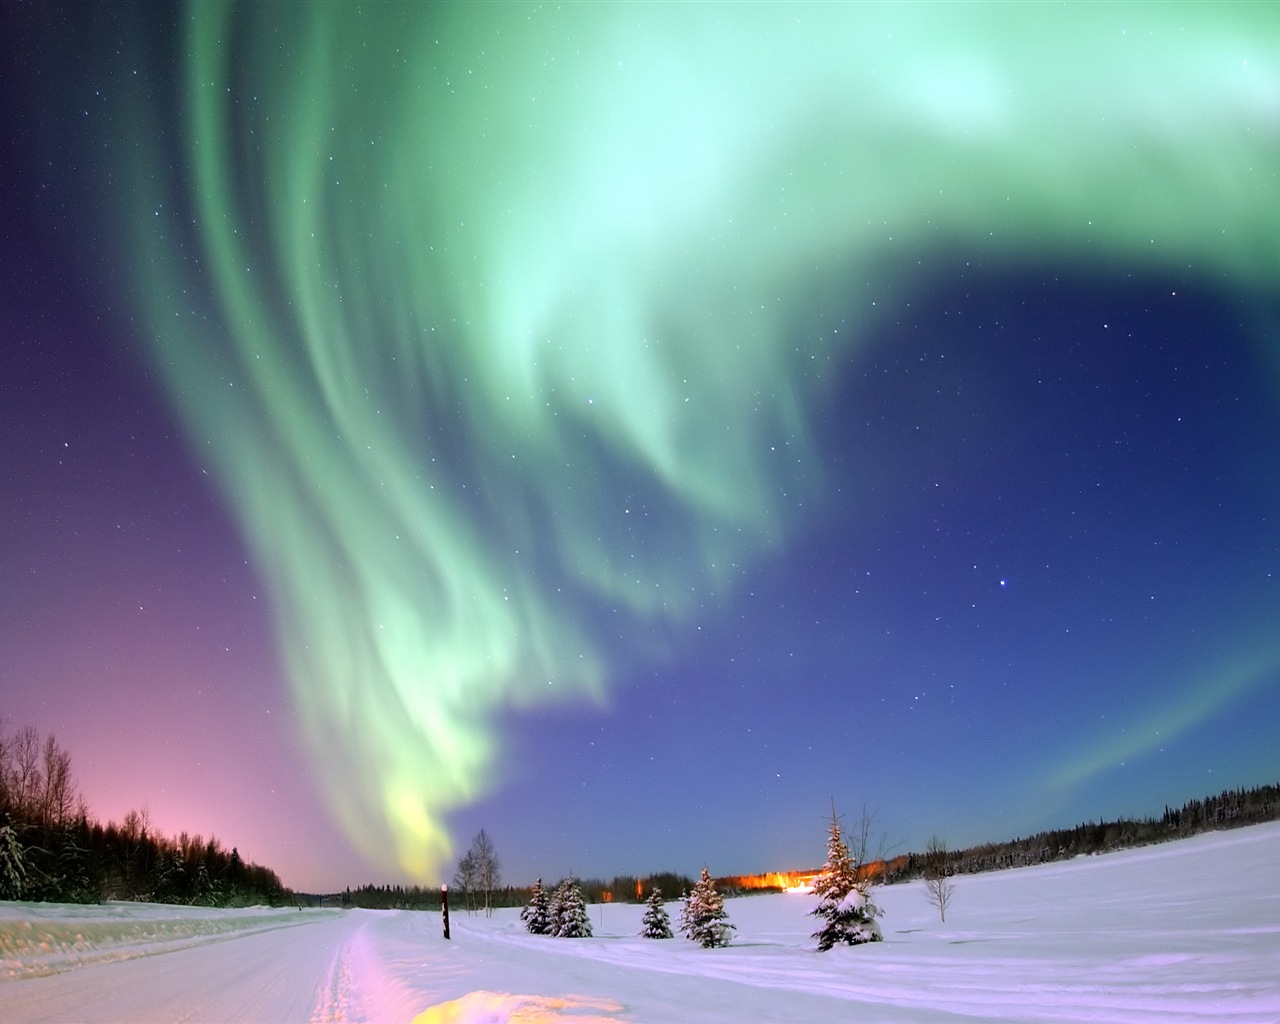 Natural wonders of the Northern Lights HD Wallpaper (2) #22 - 1280x1024